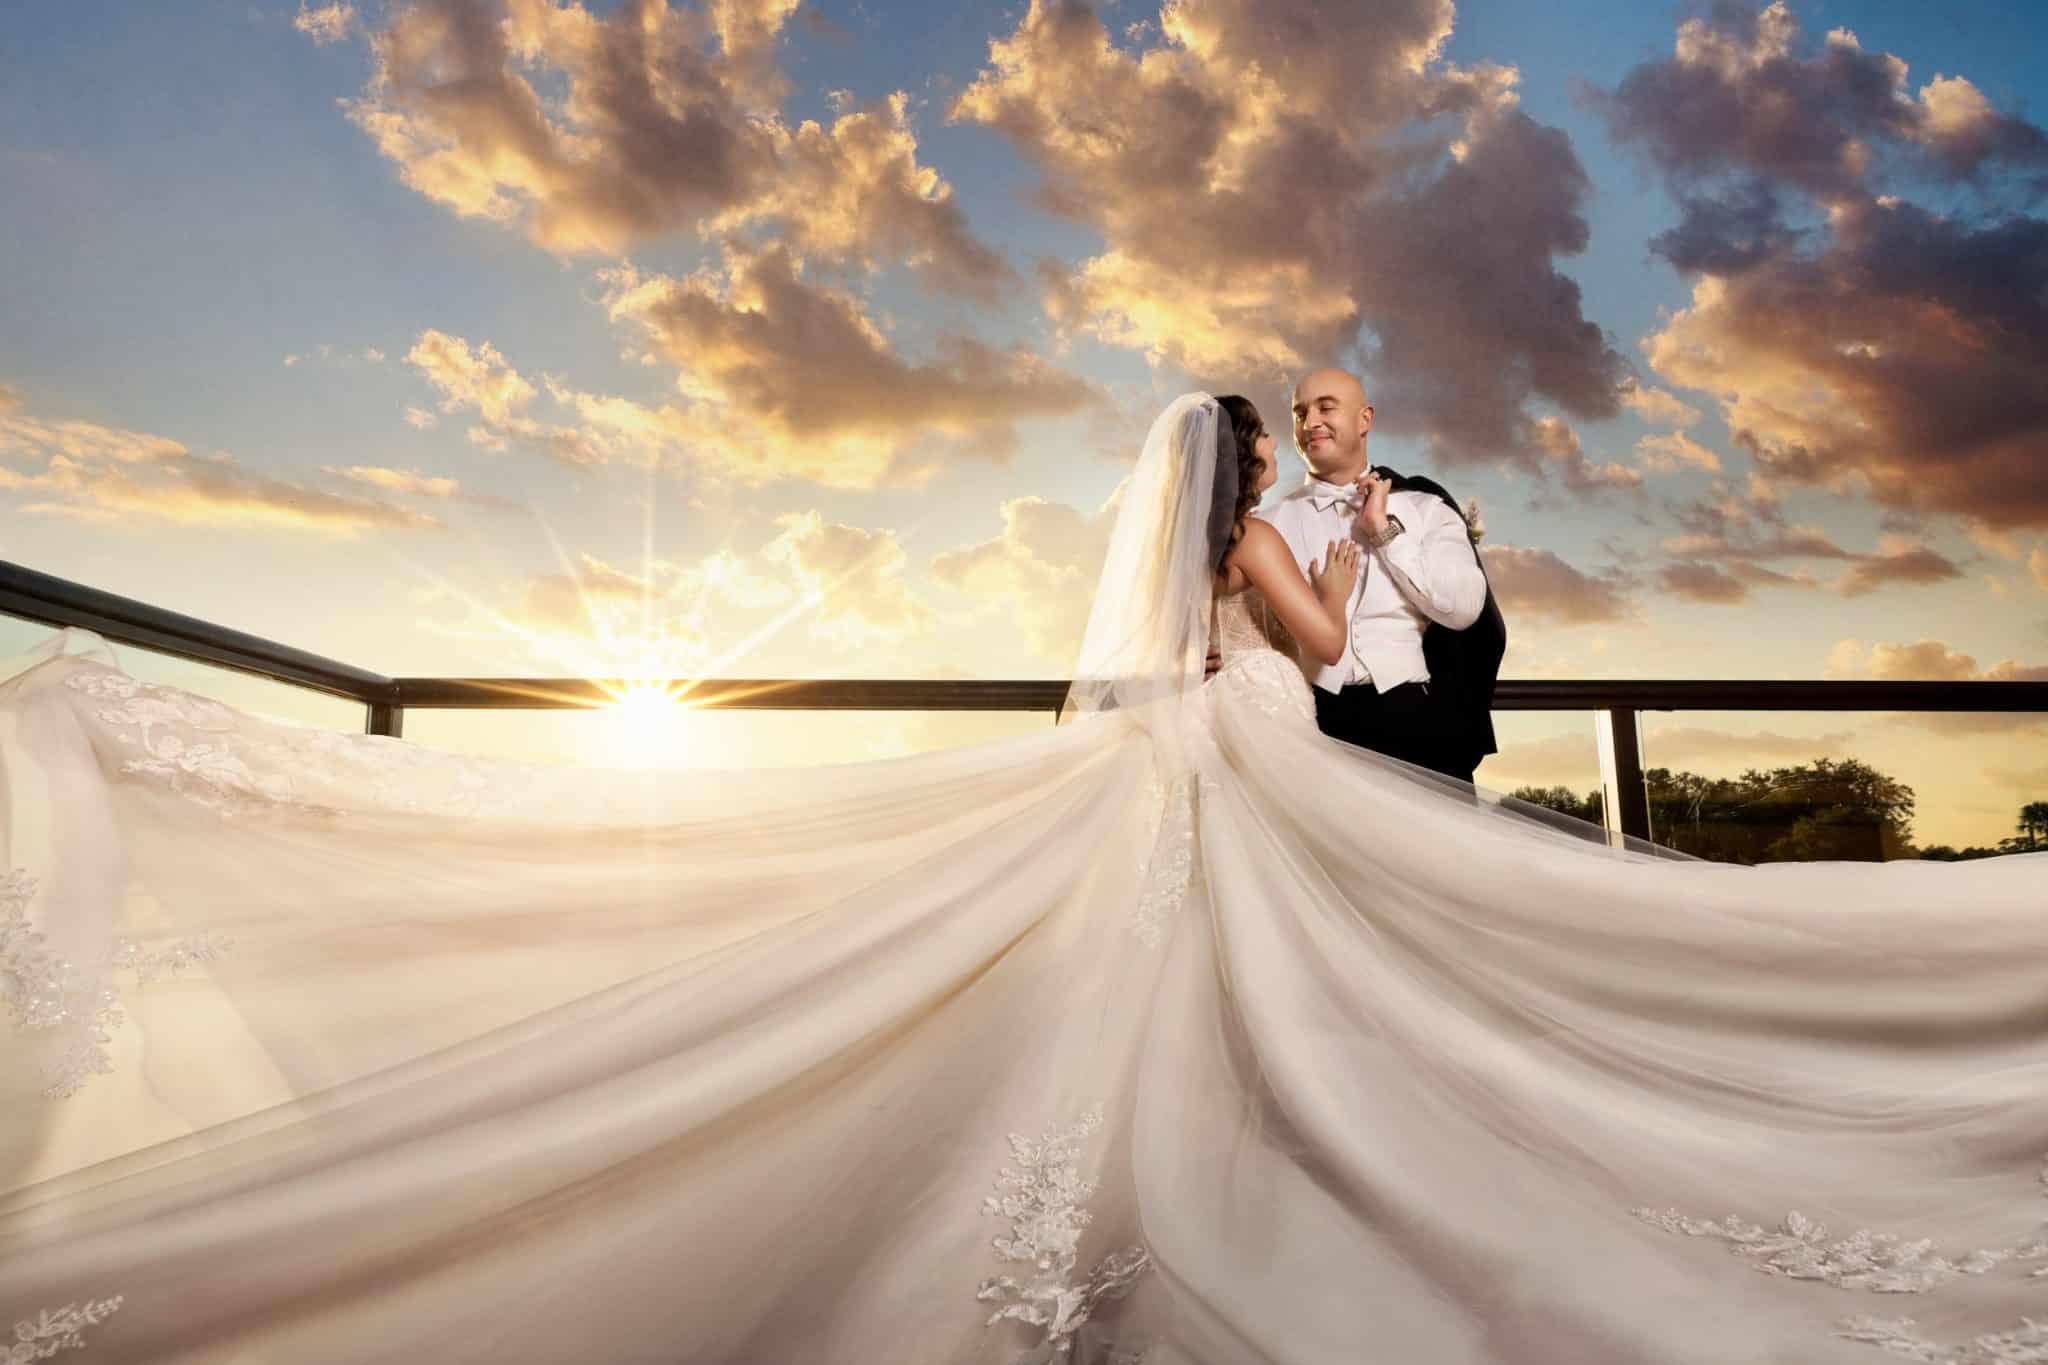 husband and wife on wedding day pose for dramatic picture outside with sun and clouds